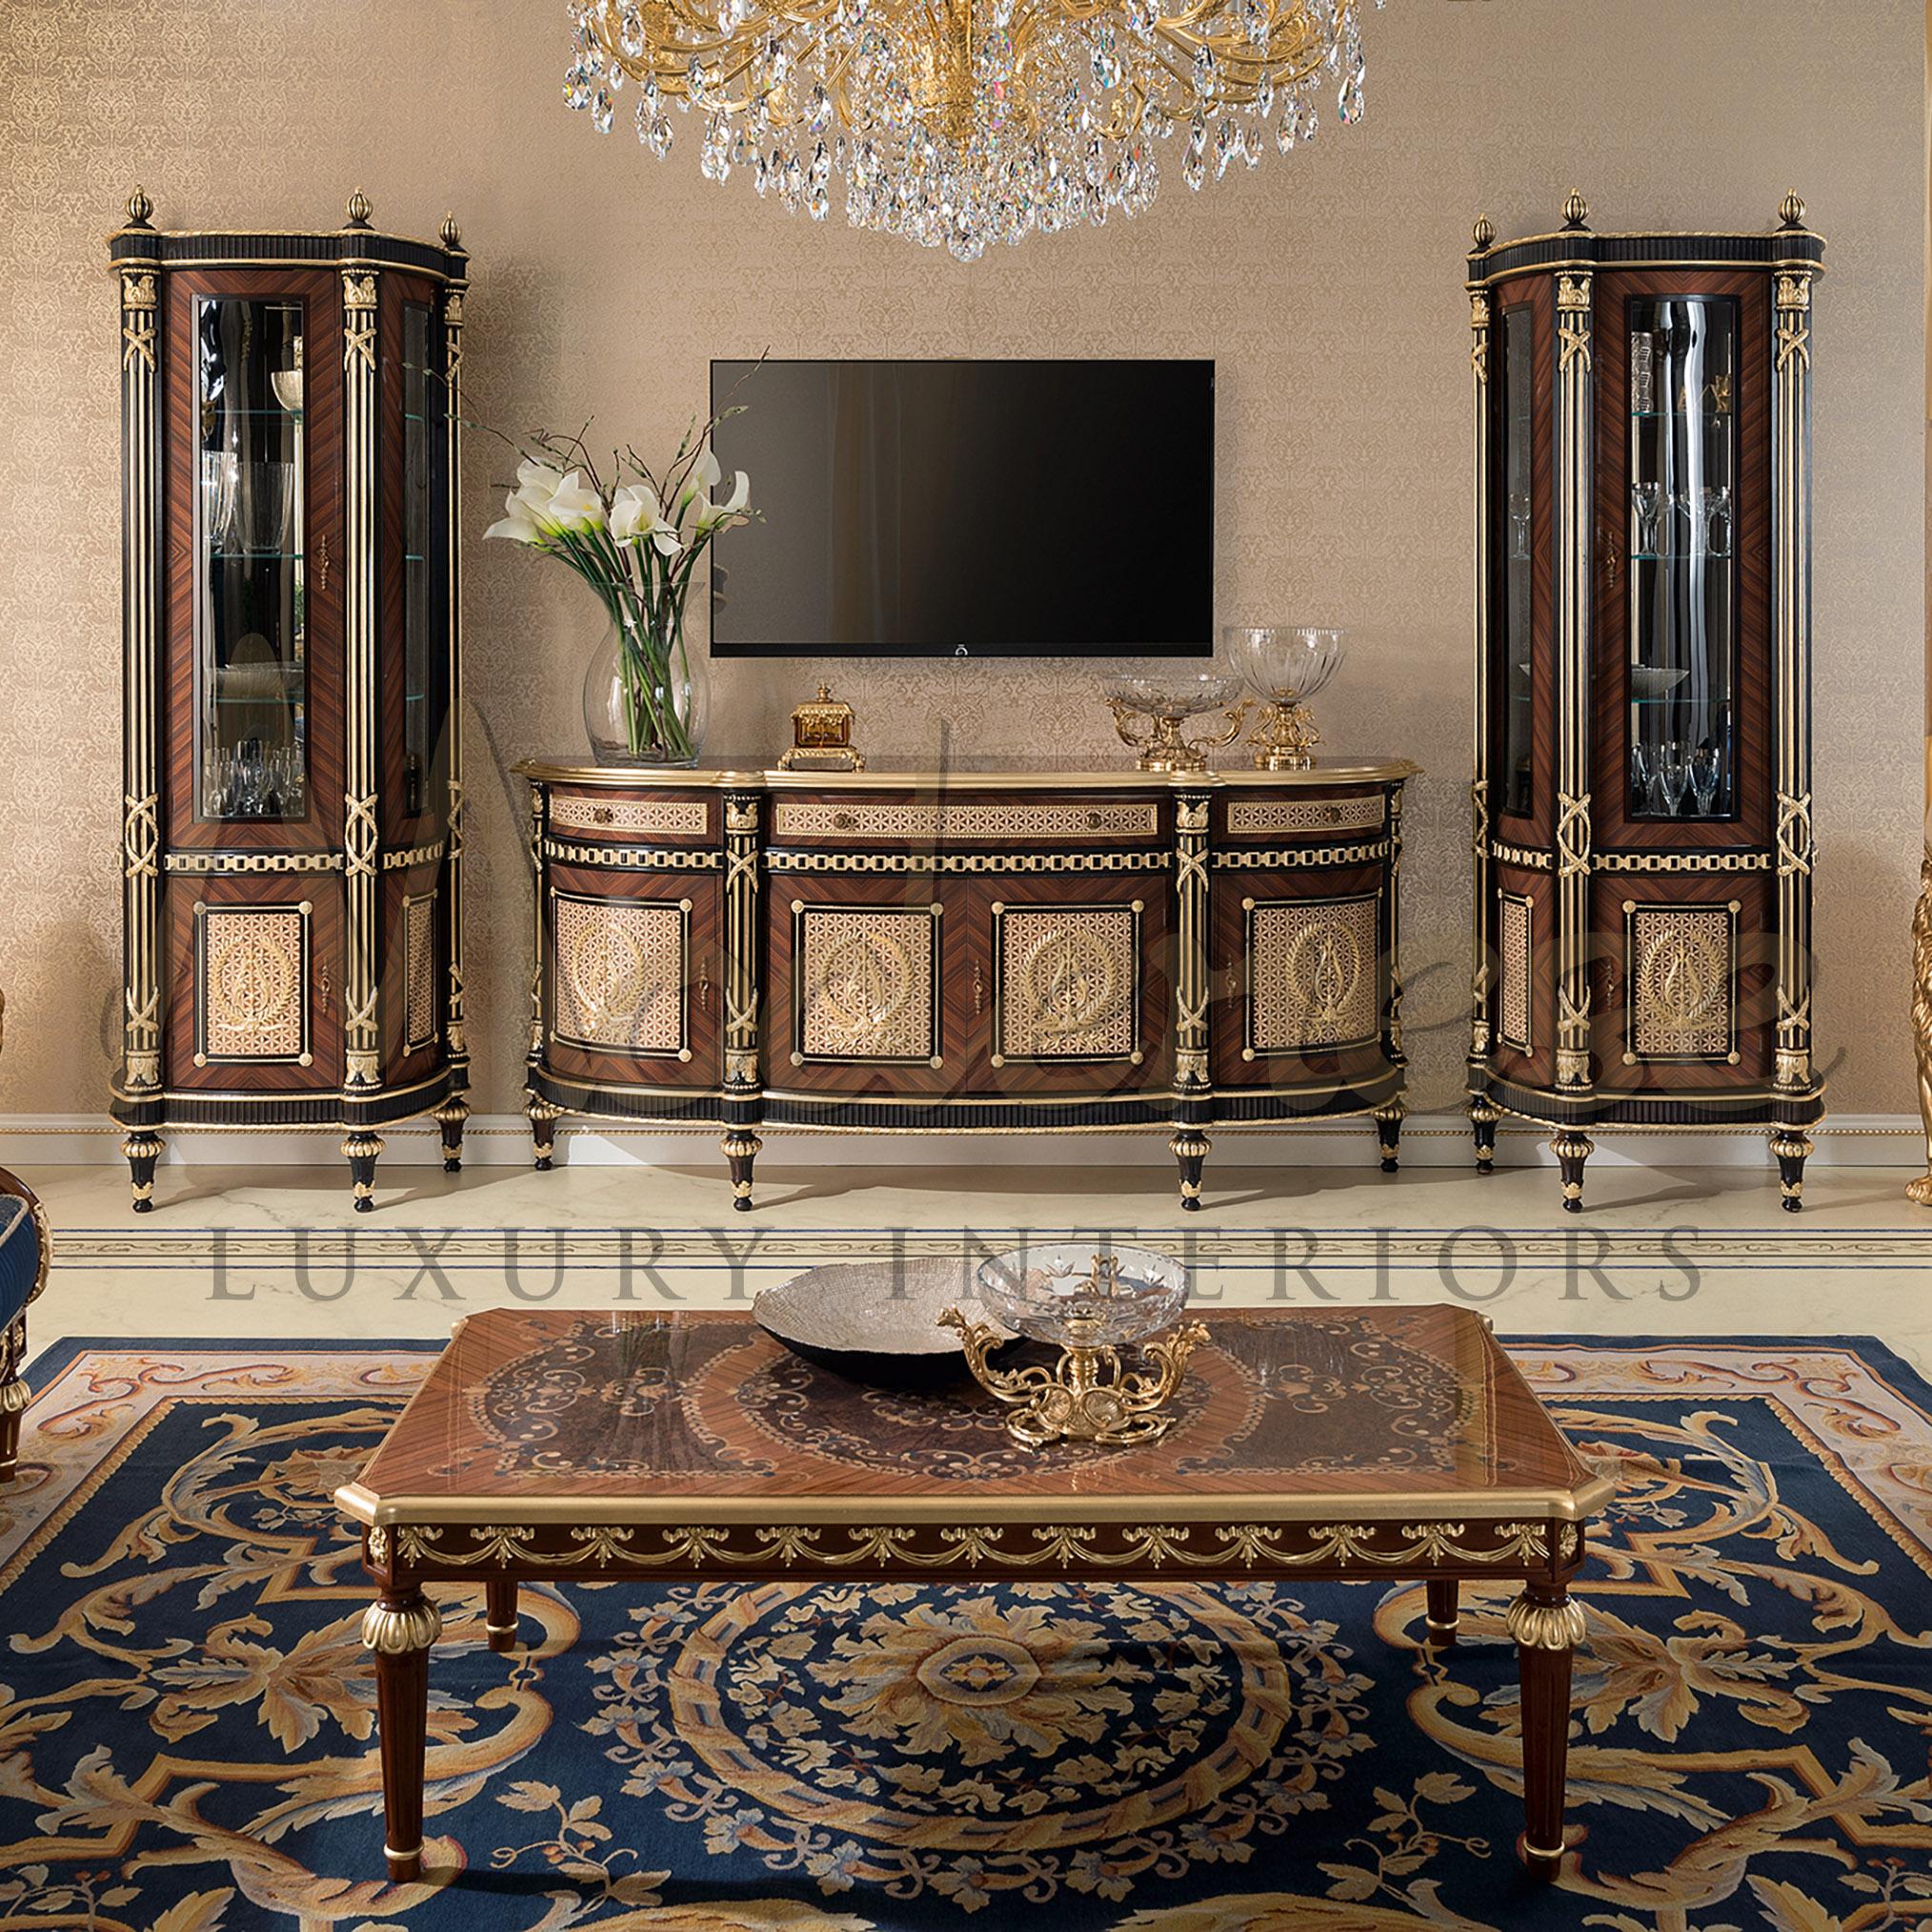 Your home interior will never be the same with this Modenese Gastone Luxury Interior masterpiece. From the bottom-up: empire style legs, inlays with decorative woods and radica insert, dark finished columns with gold leaf lined details and a slim